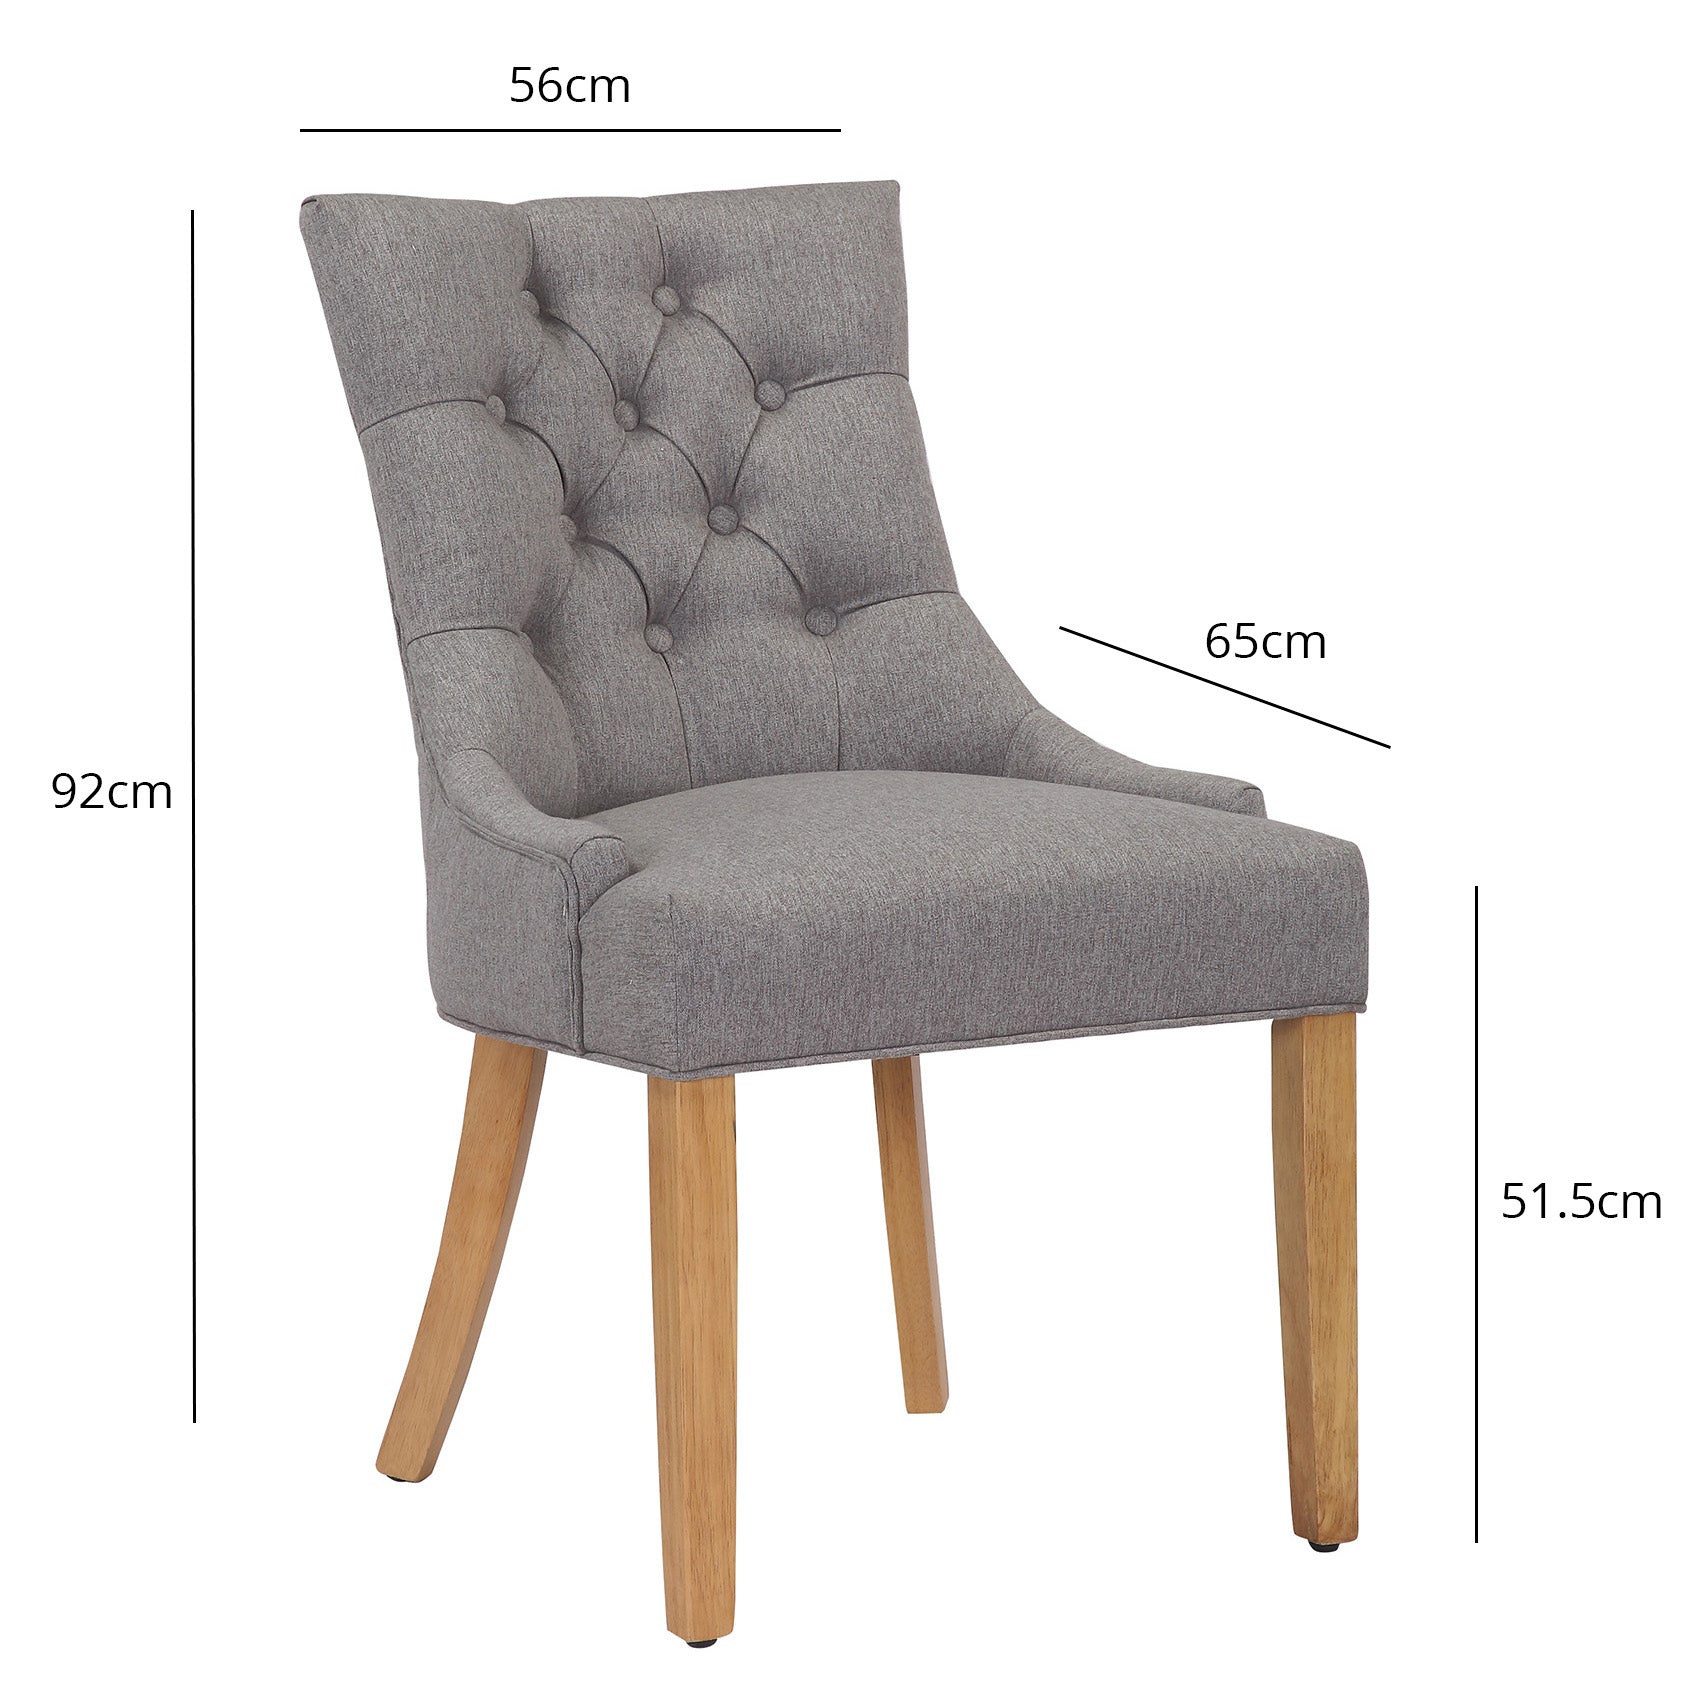 Louis dining chairs - grey and light wood - Laura James